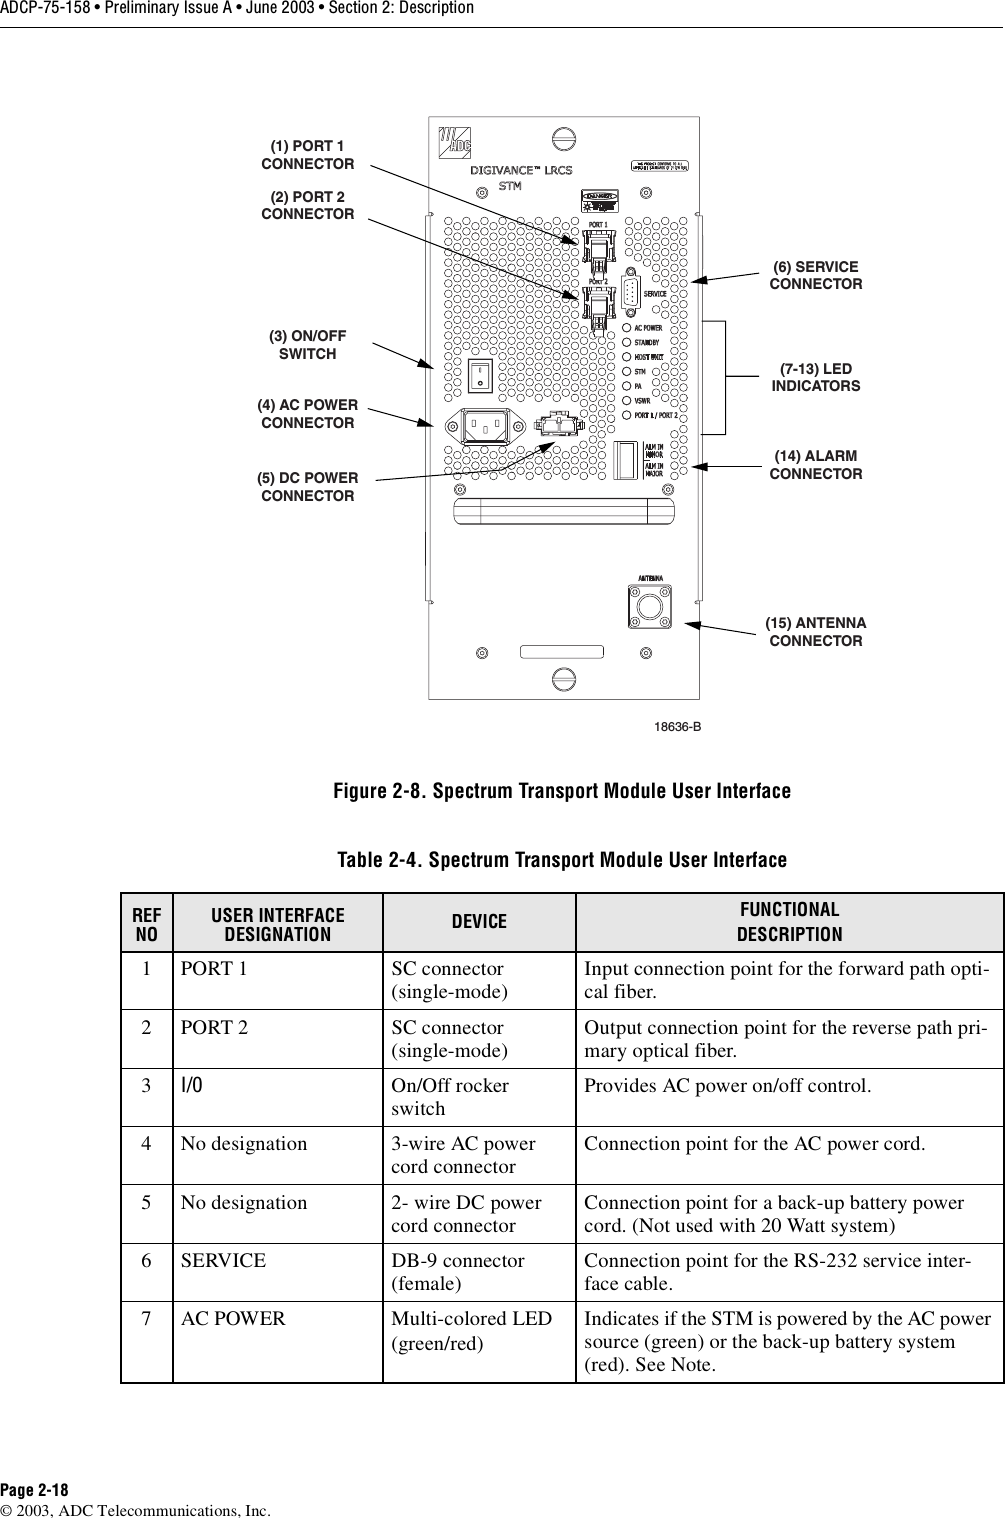 ADCP-75-158 • Preliminary Issue A • June 2003 • Section 2: DescriptionPage 2-18© 2003, ADC Telecommunications, Inc.Figure 2-8. Spectrum Transport Module User InterfaceTable 2-4. Spectrum Transport Module User InterfaceREF NOUSER INTERFACE DESIGNATION DEVICE FUNCTIONALDESCRIPTION1 PORT 1 SC connector(single-mode) Input connection point for the forward path opti-cal fiber.2 PORT 2 SC connector(single-mode) Output connection point for the reverse path pri-mary optical fiber.3I/0 On/Off rocker switch Provides AC power on/off control. 4 No designation 3-wire AC power cord connector Connection point for the AC power cord. 5 No designation 2- wire DC power cord connector Connection point for a back-up battery power cord. (Not used with 20 Watt system)6 SERVICE DB-9 connector (female) Connection point for the RS-232 service inter-face cable. 7 AC POWER Multi-colored LED(green/red)Indicates if the STM is powered by the AC power source (green) or the back-up battery system (red). See Note.18636-B(3) ON/OFFSWITCH(4) AC POWERCONNECTOR(5) DC POWERCONNECTOR(1) PORT 1CONNECTOR(2) PORT 2CONNECTOR(6) SERVICECONNECTOR(7-13) LEDINDICATORS(14) ALARMCONNECTOR(15) ANTENNACONNECTOR